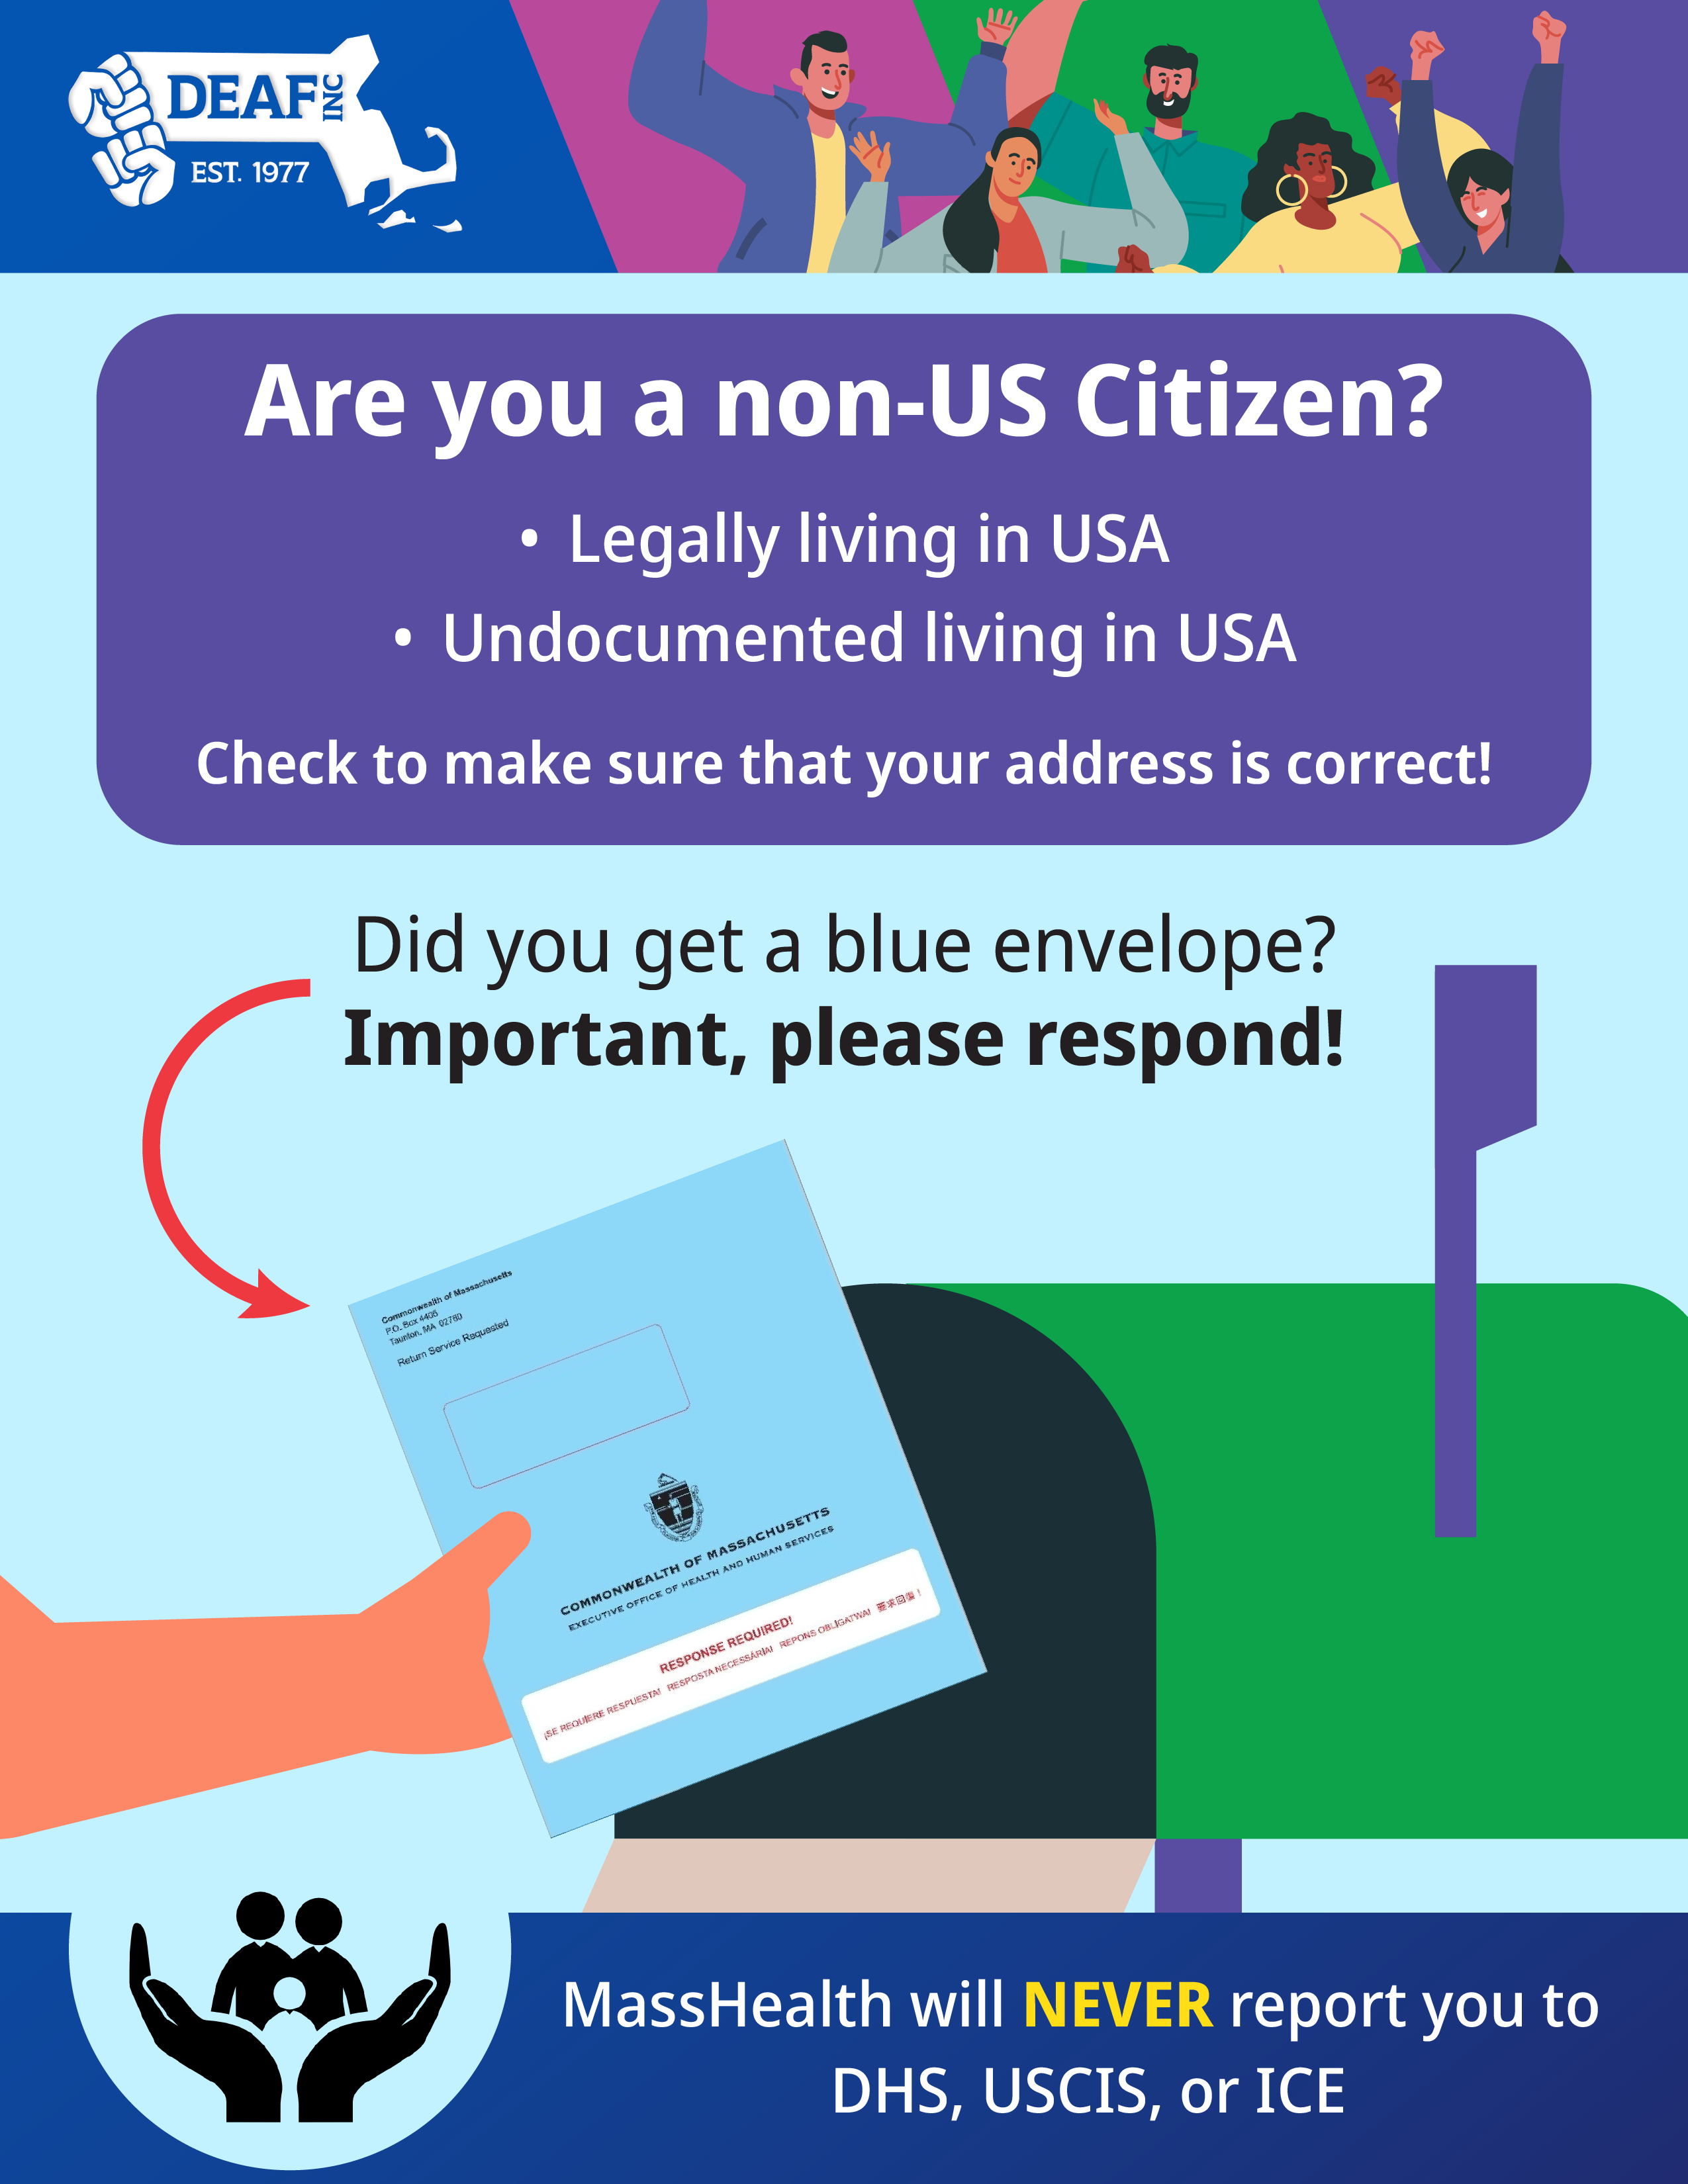 Flyer: A light blue back ground, at the very top is the DEAF, Inc. logo, and at the center is a hand putting a blue paper into a green mailbox. The text reads, “Are you a non-US Citizen? • Legally living in USA • Undocumented living in USA Check to make sure that your address is correct! Did you get a blue envelope. Important, please respond! MassHealth will NEVER report you to DHS, USCIS, or ICE”